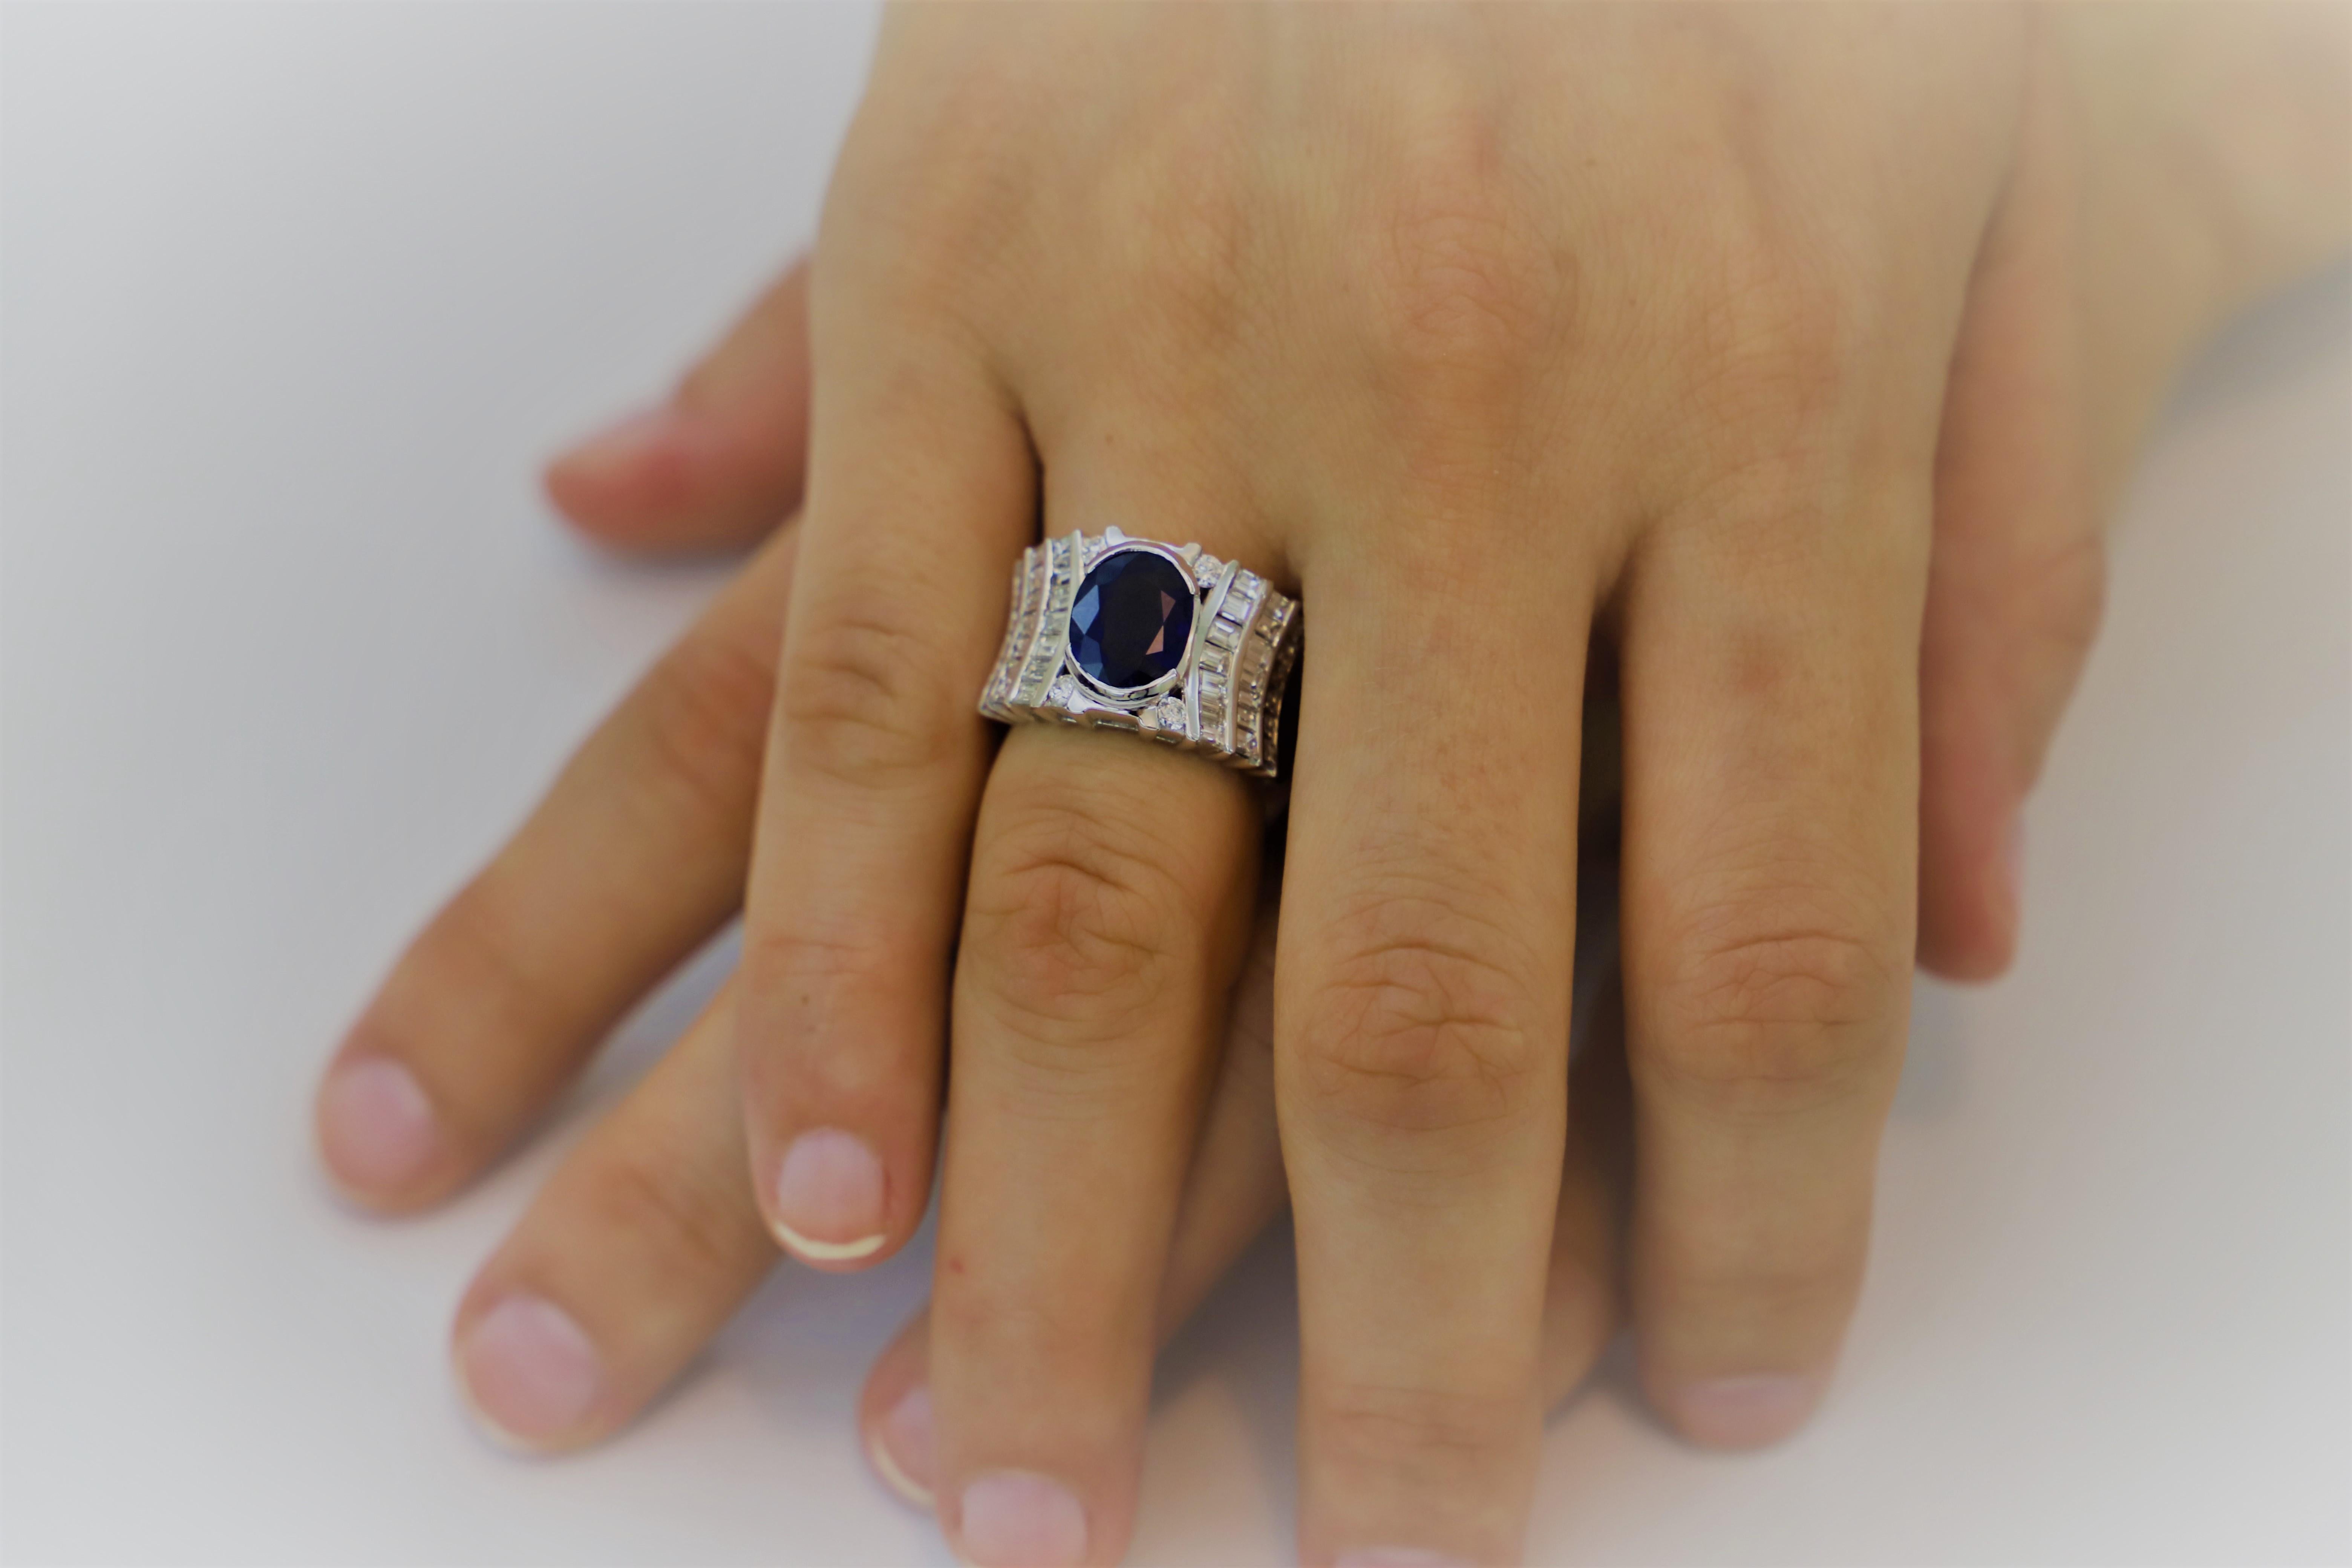 Elegant and Sophisticated Cocktail Ring featuring a 3.20 Carat Oval Sapphire, framed by 4 White Round Diamonds. 
On both sides of the Sapphire, are 3 lines of White Baguette Diamonds, to   enhance brightness and blinking.
White Diamonds are 2.43